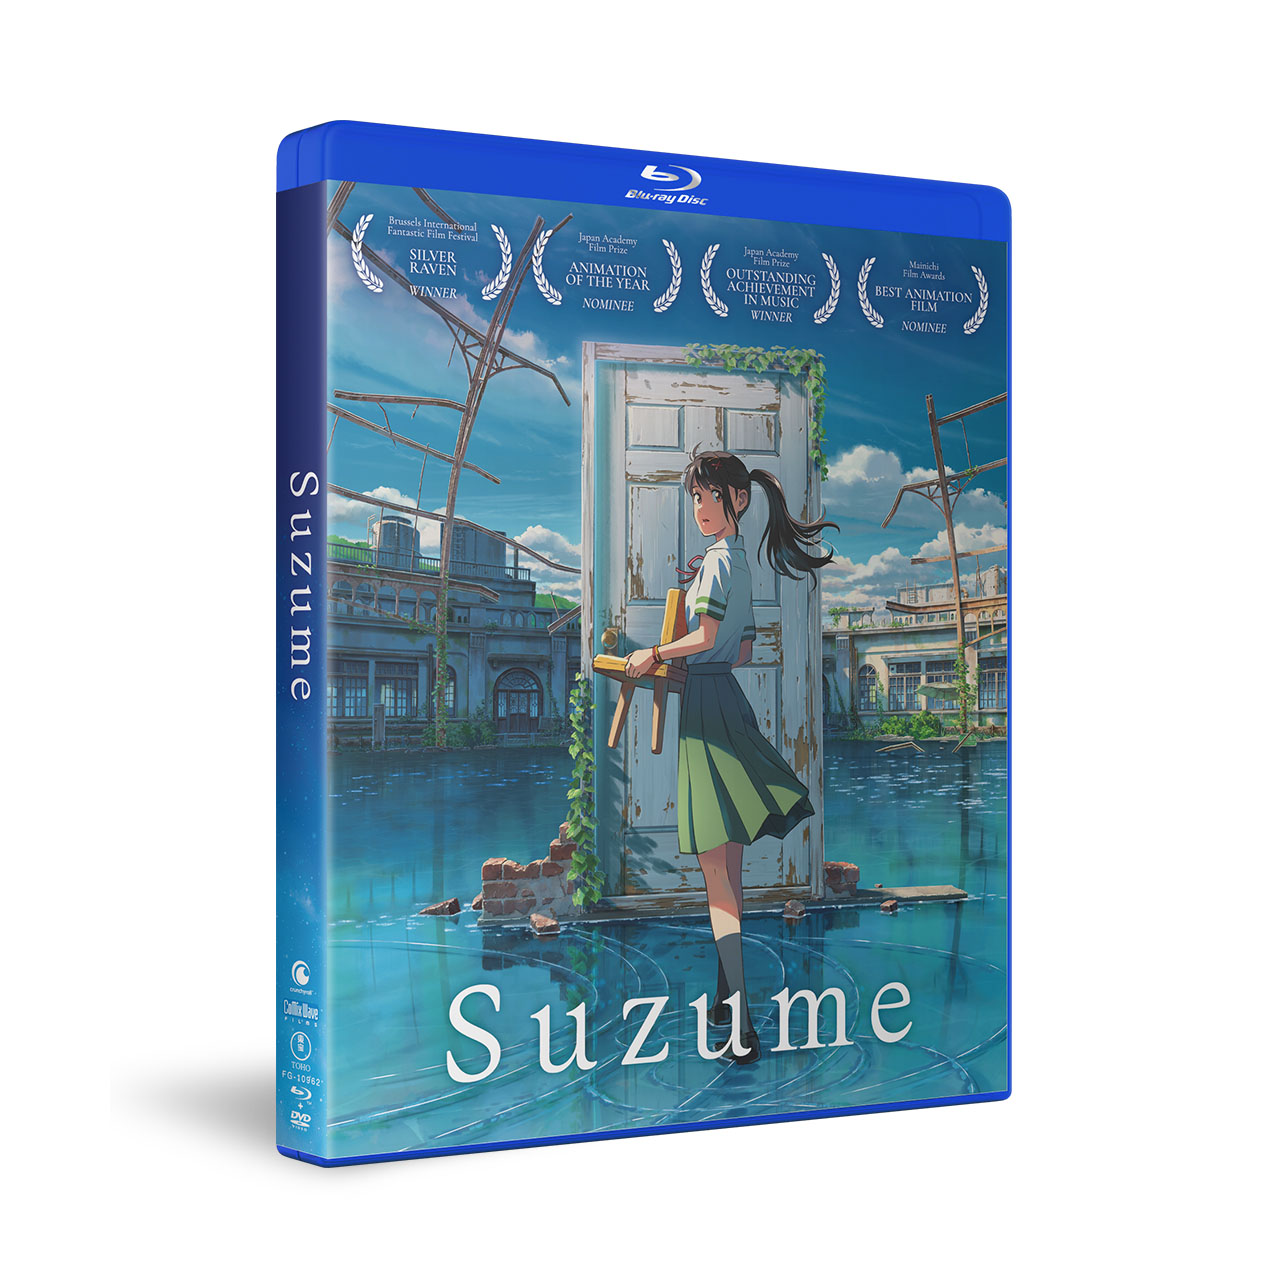 Suzume - Movie - Blu-ray + DVD - Limited Edition image count 2